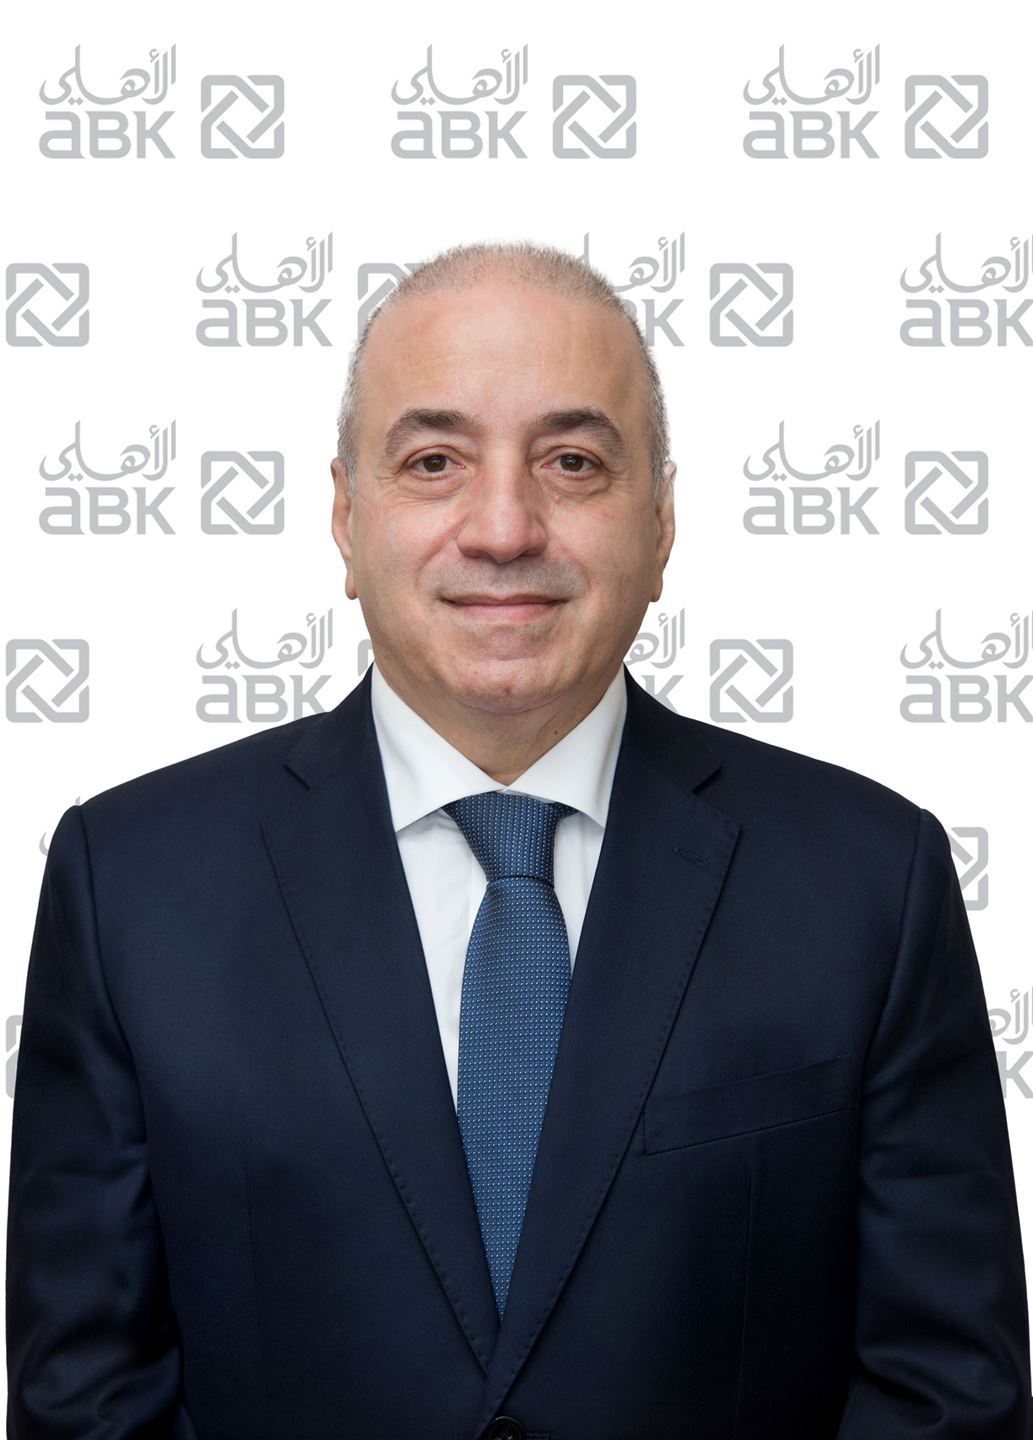 Mr. George Richani, Group Chief Executive Officer at ABK